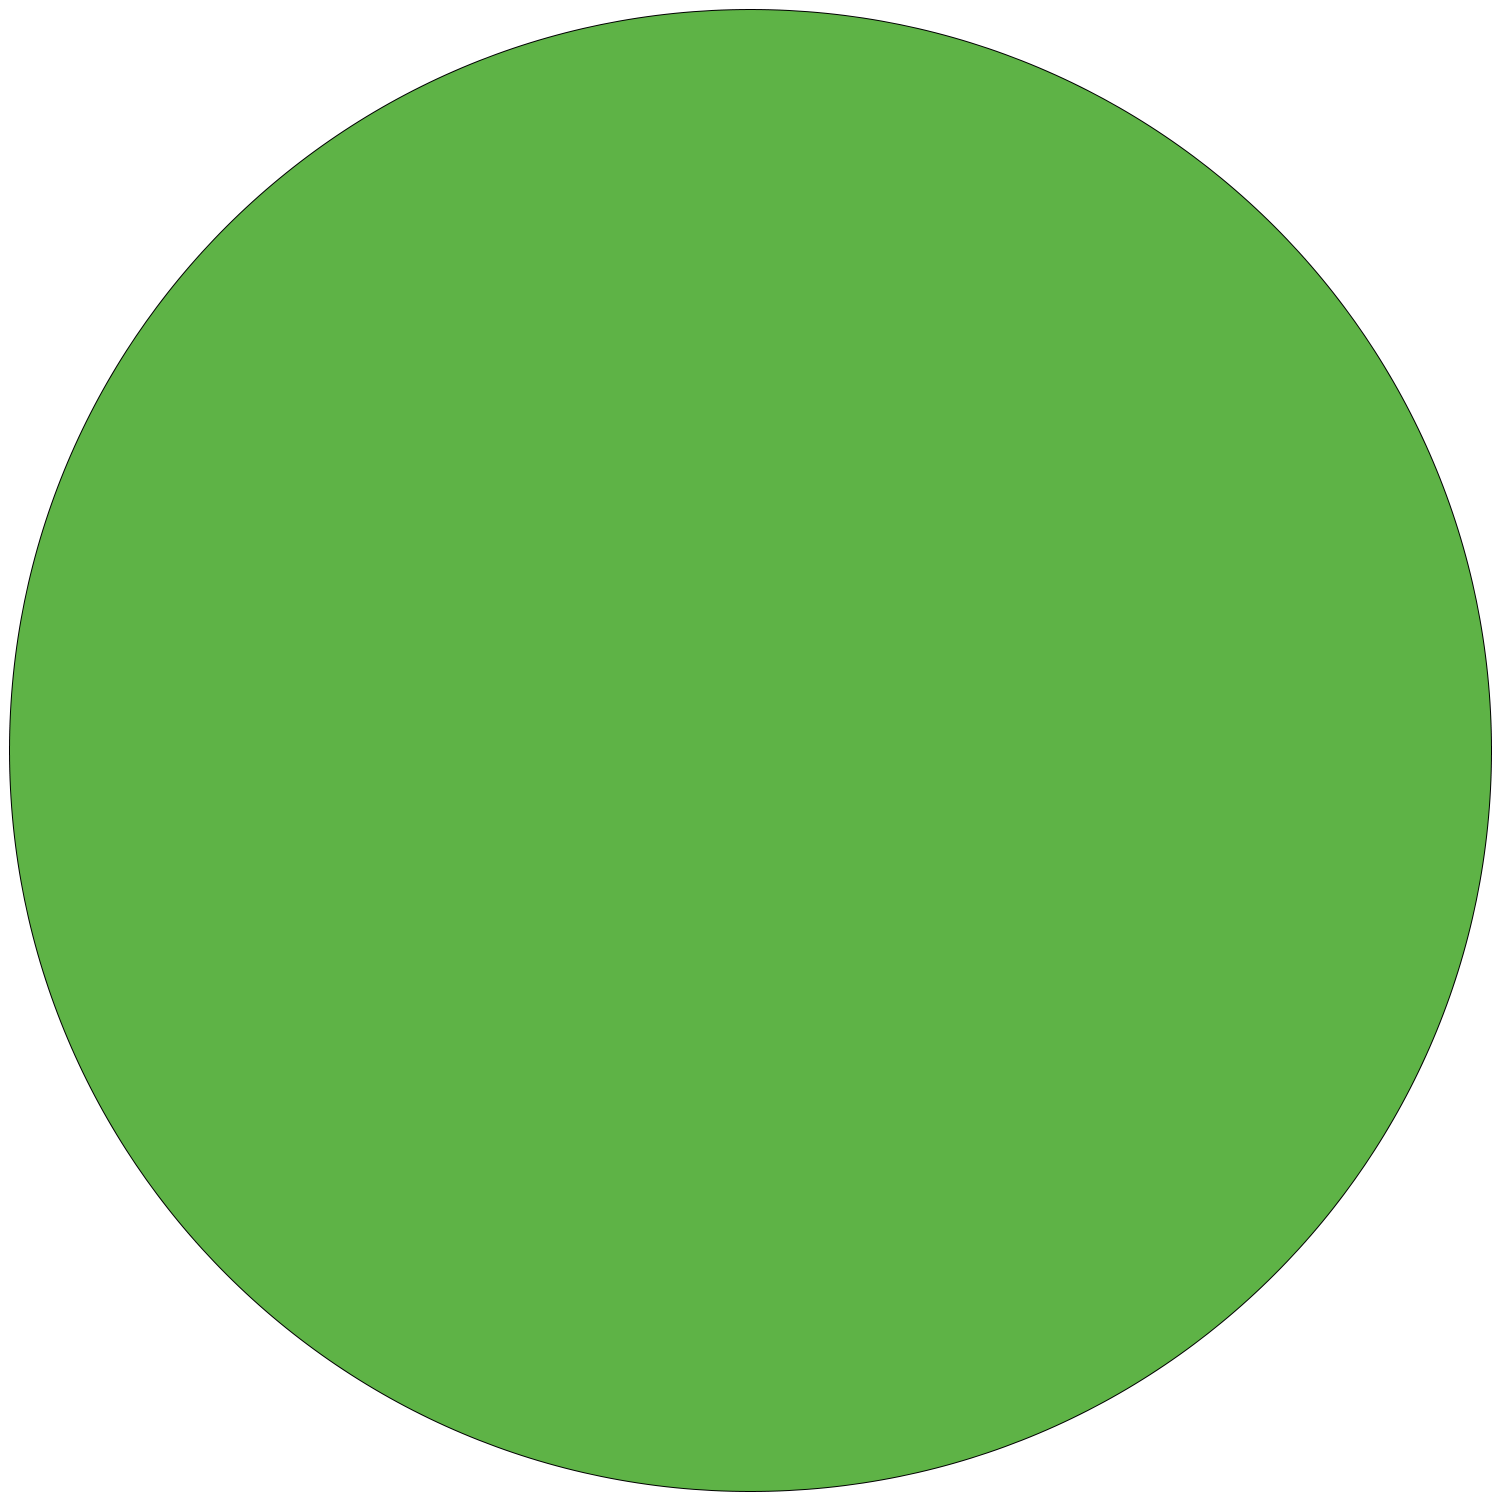 Primary Green Circle
